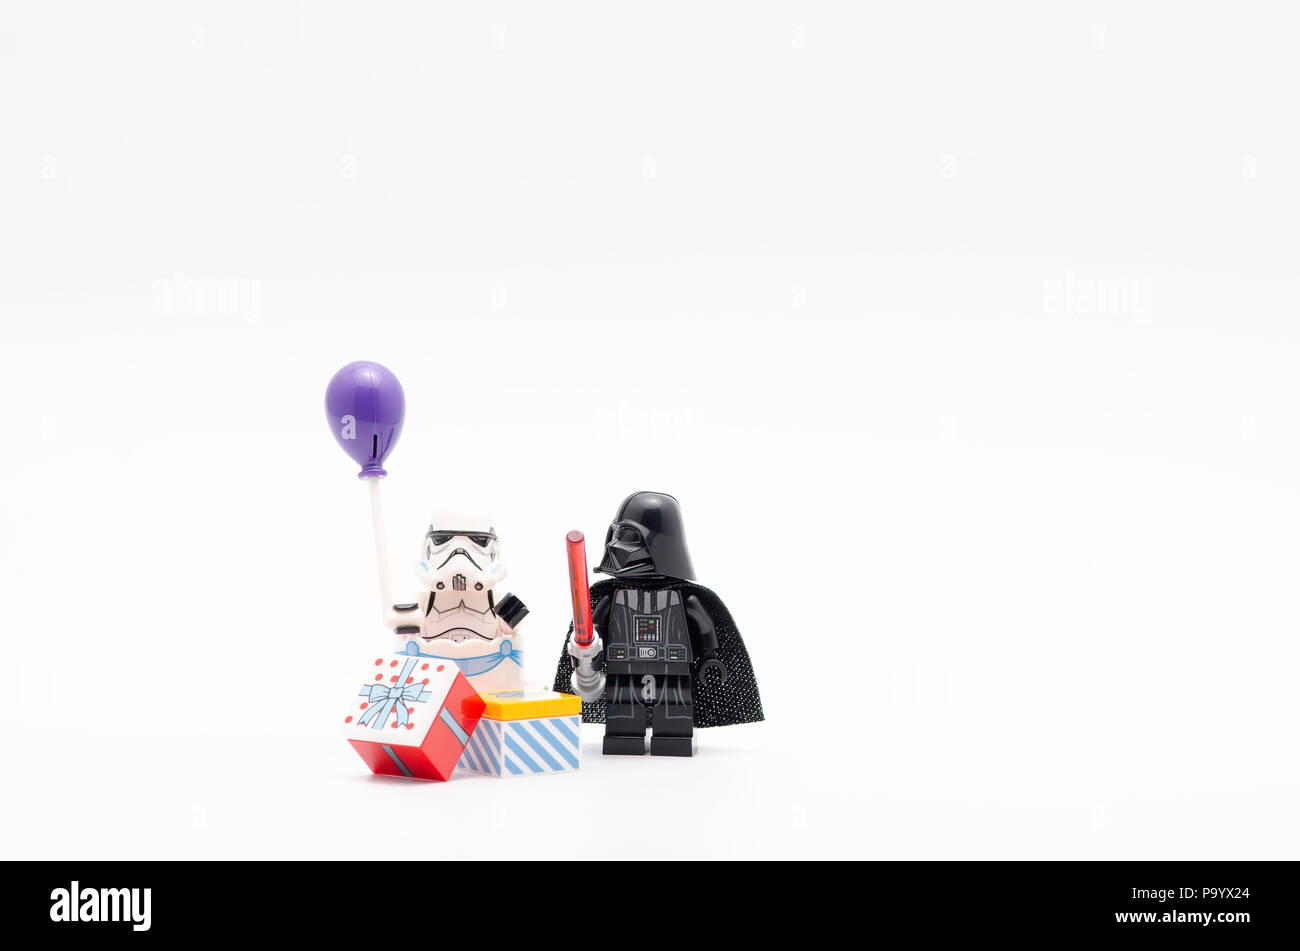 lego darth vader with storm troopers holding a balloon. Lego minifigures  are manufactured by The Lego Group Stock Photo - Alamy